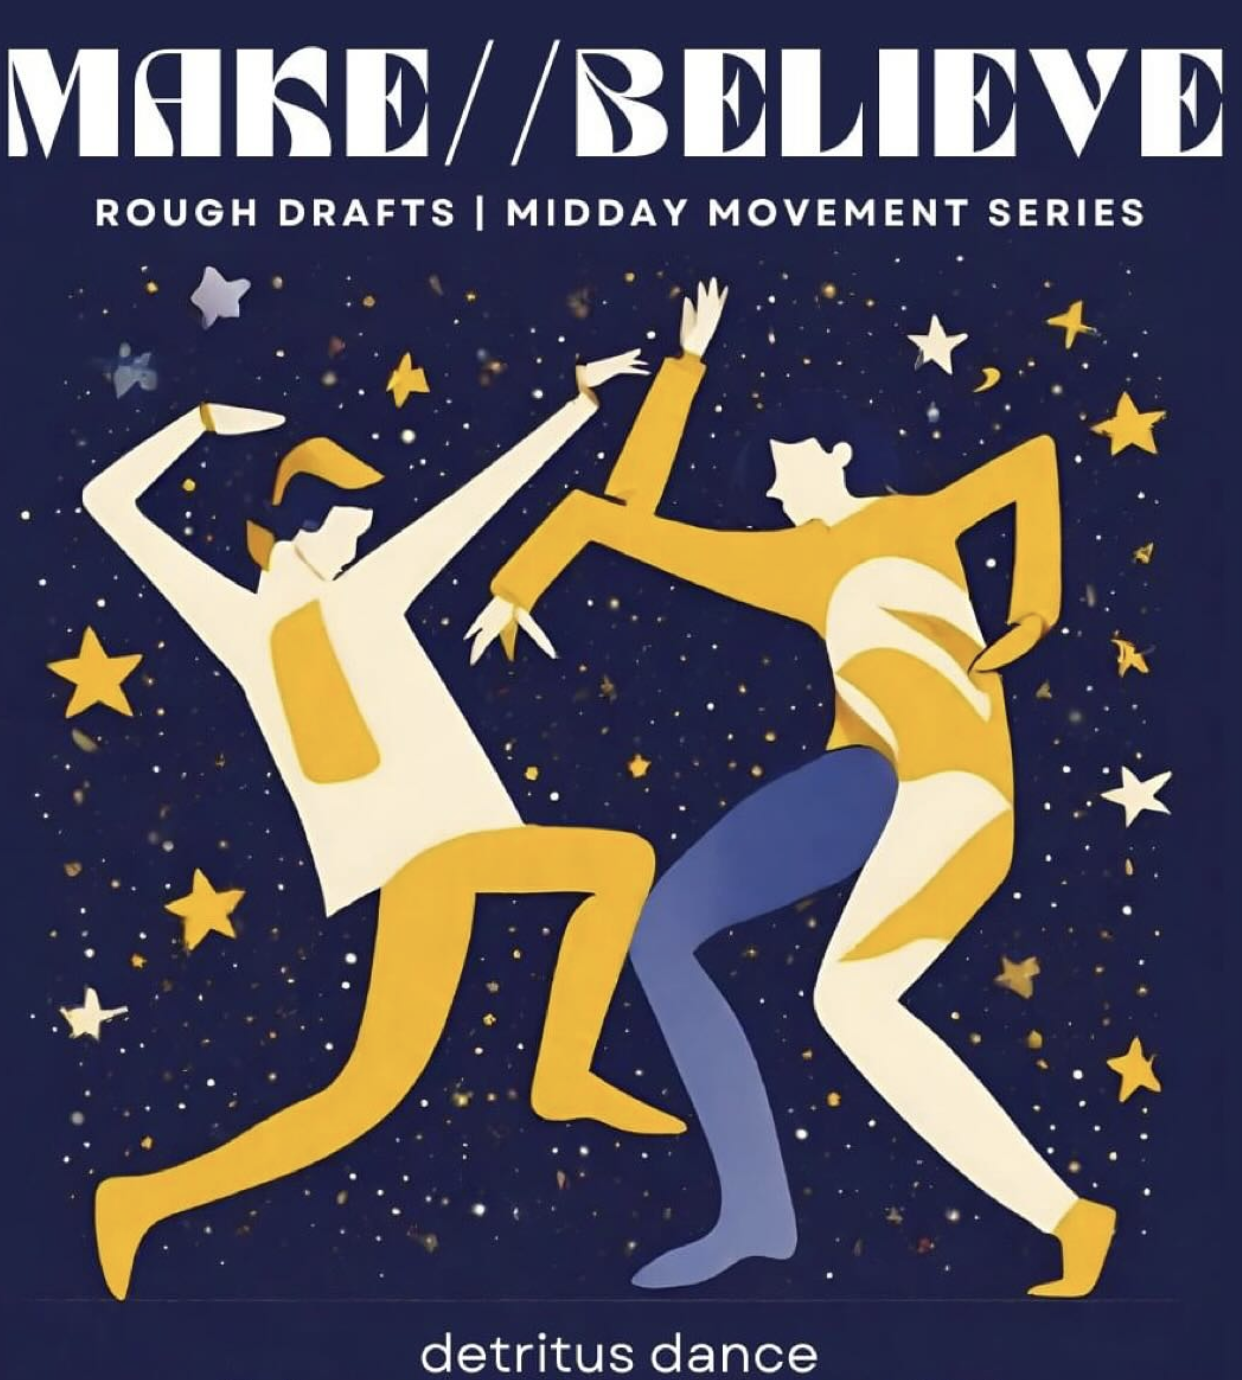 Promotional graphic for "Make/Believe" with illustration of two dancers moving among stars.